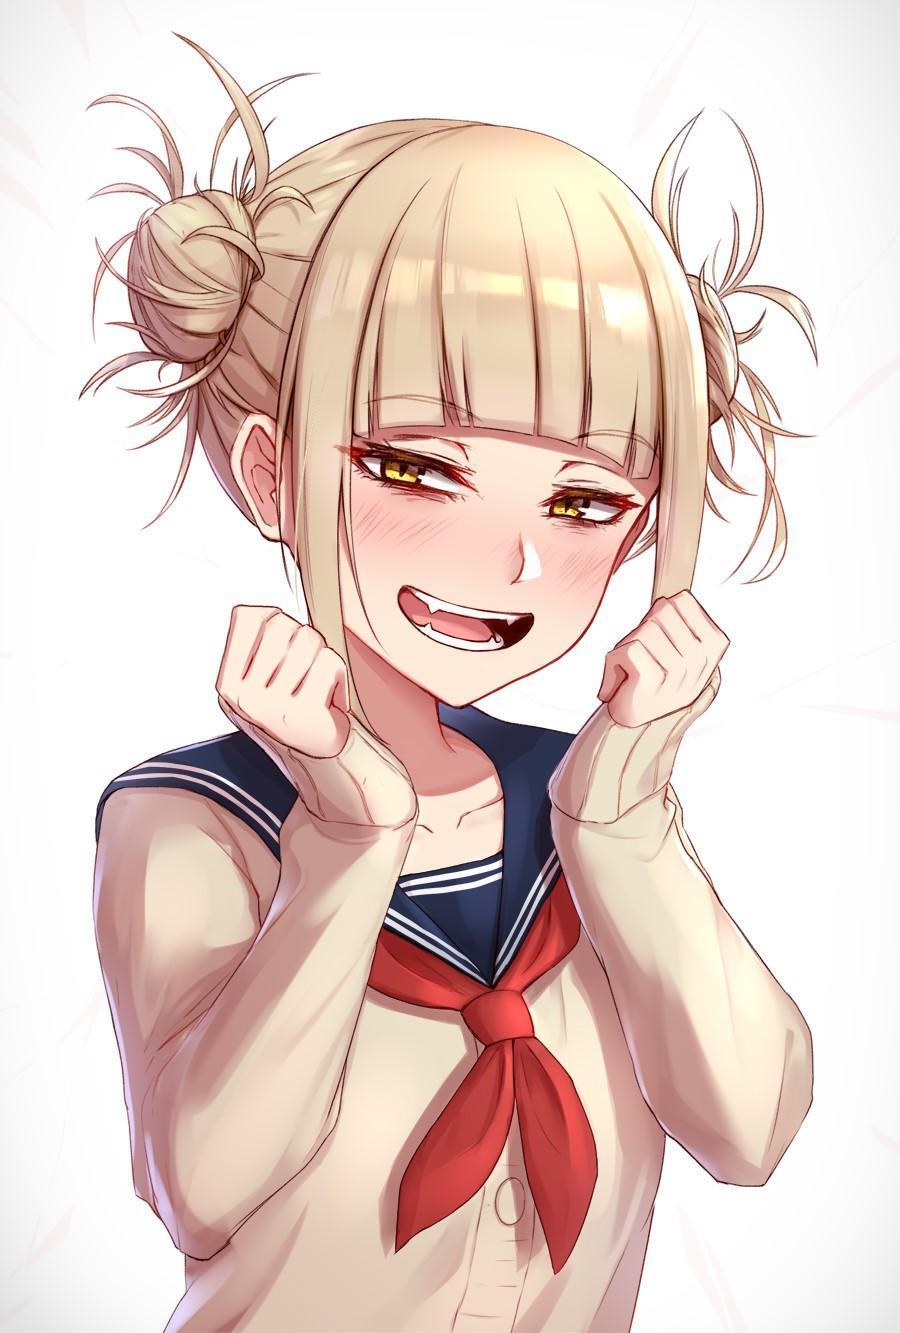 HD wallpaper, Blunt Bangs, Anime, Anime Girls, Vertical, Messy Hair, Long Hair, Open Mouth, School Uniform, Odango, Embarrassed, Fan Art, Small Boobs, Fangs, Jk, Blond Hair, Yellow Eyes, Simple Background, 2D, Yandere, Boku No Hero Academia, Looking At Viewer, Himiko Toga